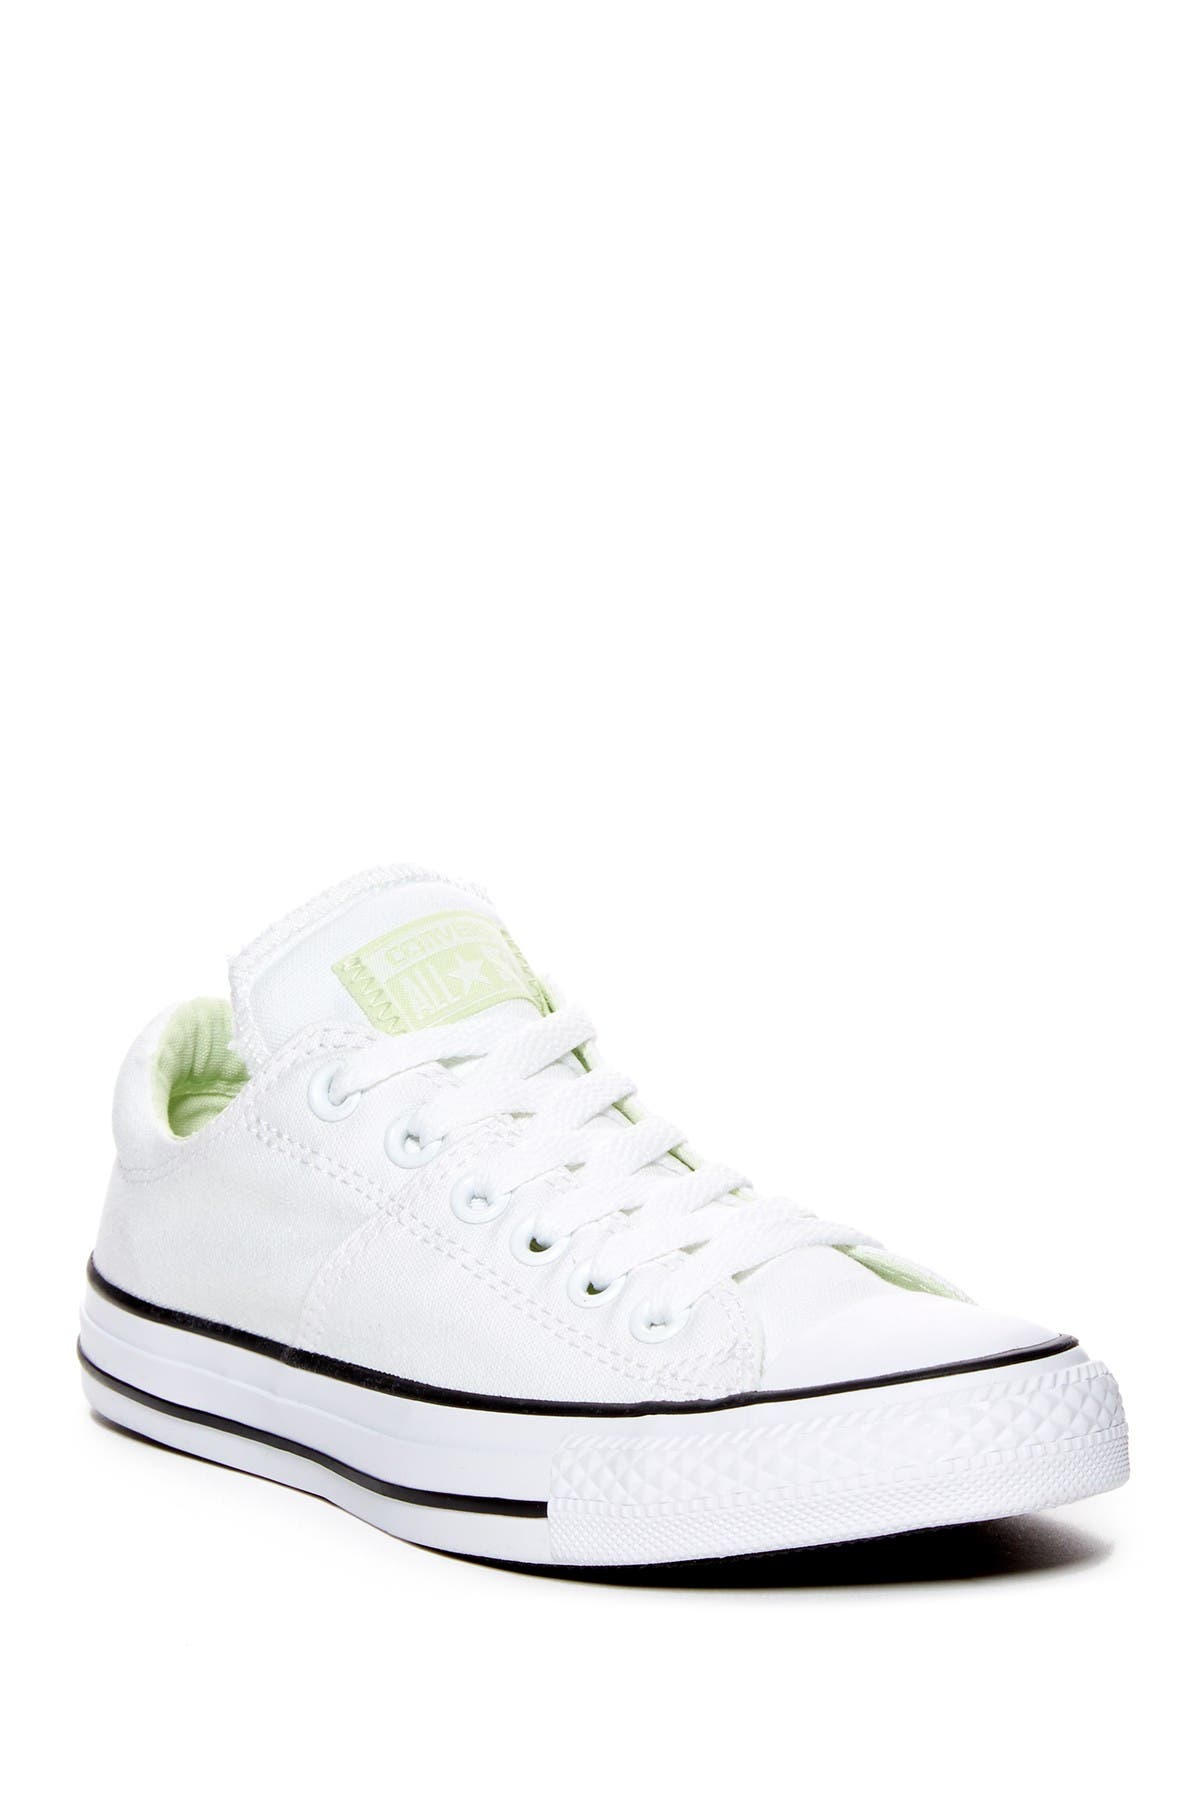 converse all star madison sneaker